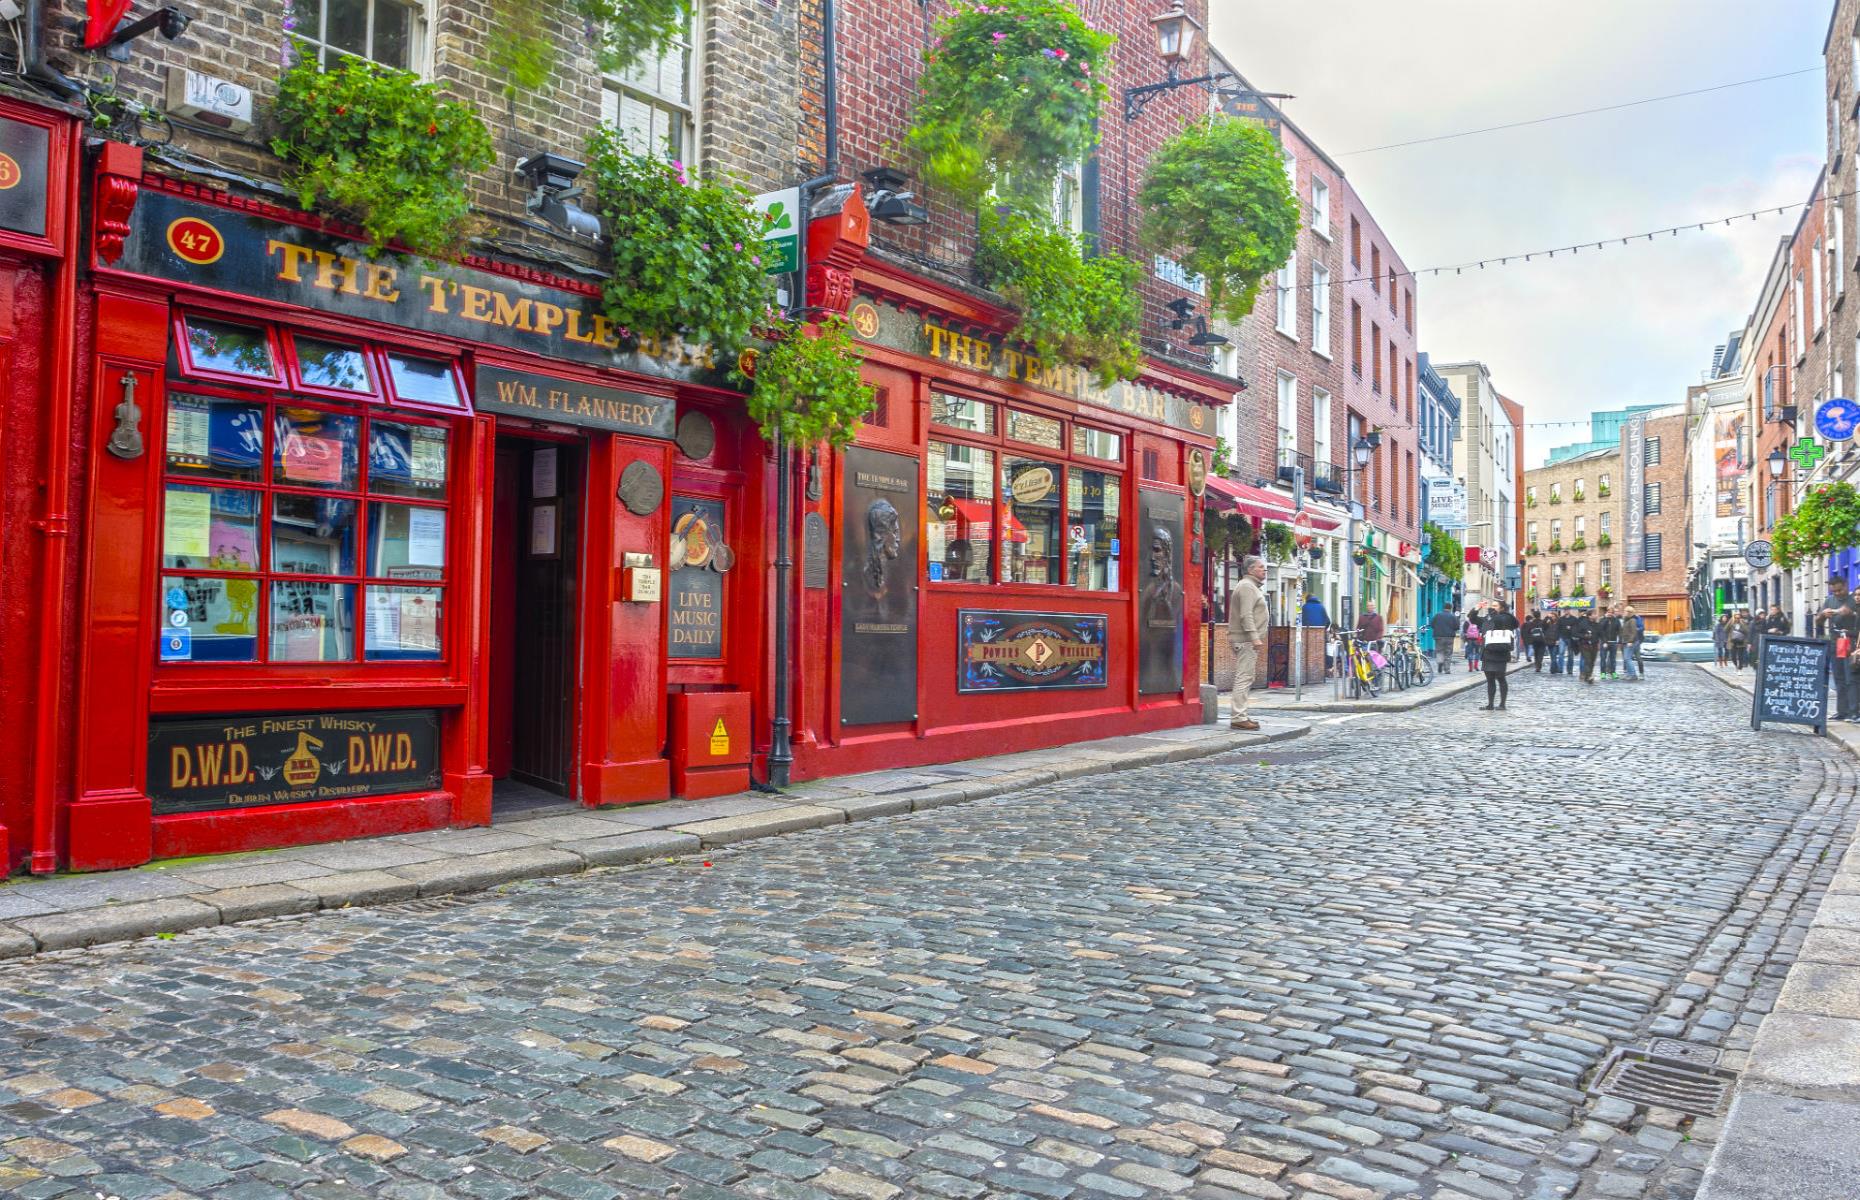 <p><strong>Index score: 66.73</strong></p>  <p>Due to high VAT rates, the cost of living in Ireland is sky-high compared to the neighbouring UK, where restaurants, rent, and grocery prices are all significantly lower. Ireland's geography doesn't help to keep things cheap. Like the UK, the fact it's an island means it must import many important goods. But unlike the UK, it also has to contend with a lack of natural resources. The country imports around 90% of its power, according to <em>The Irish Times</em>, and its average electricity prices are some of the highest in Europe.</p>